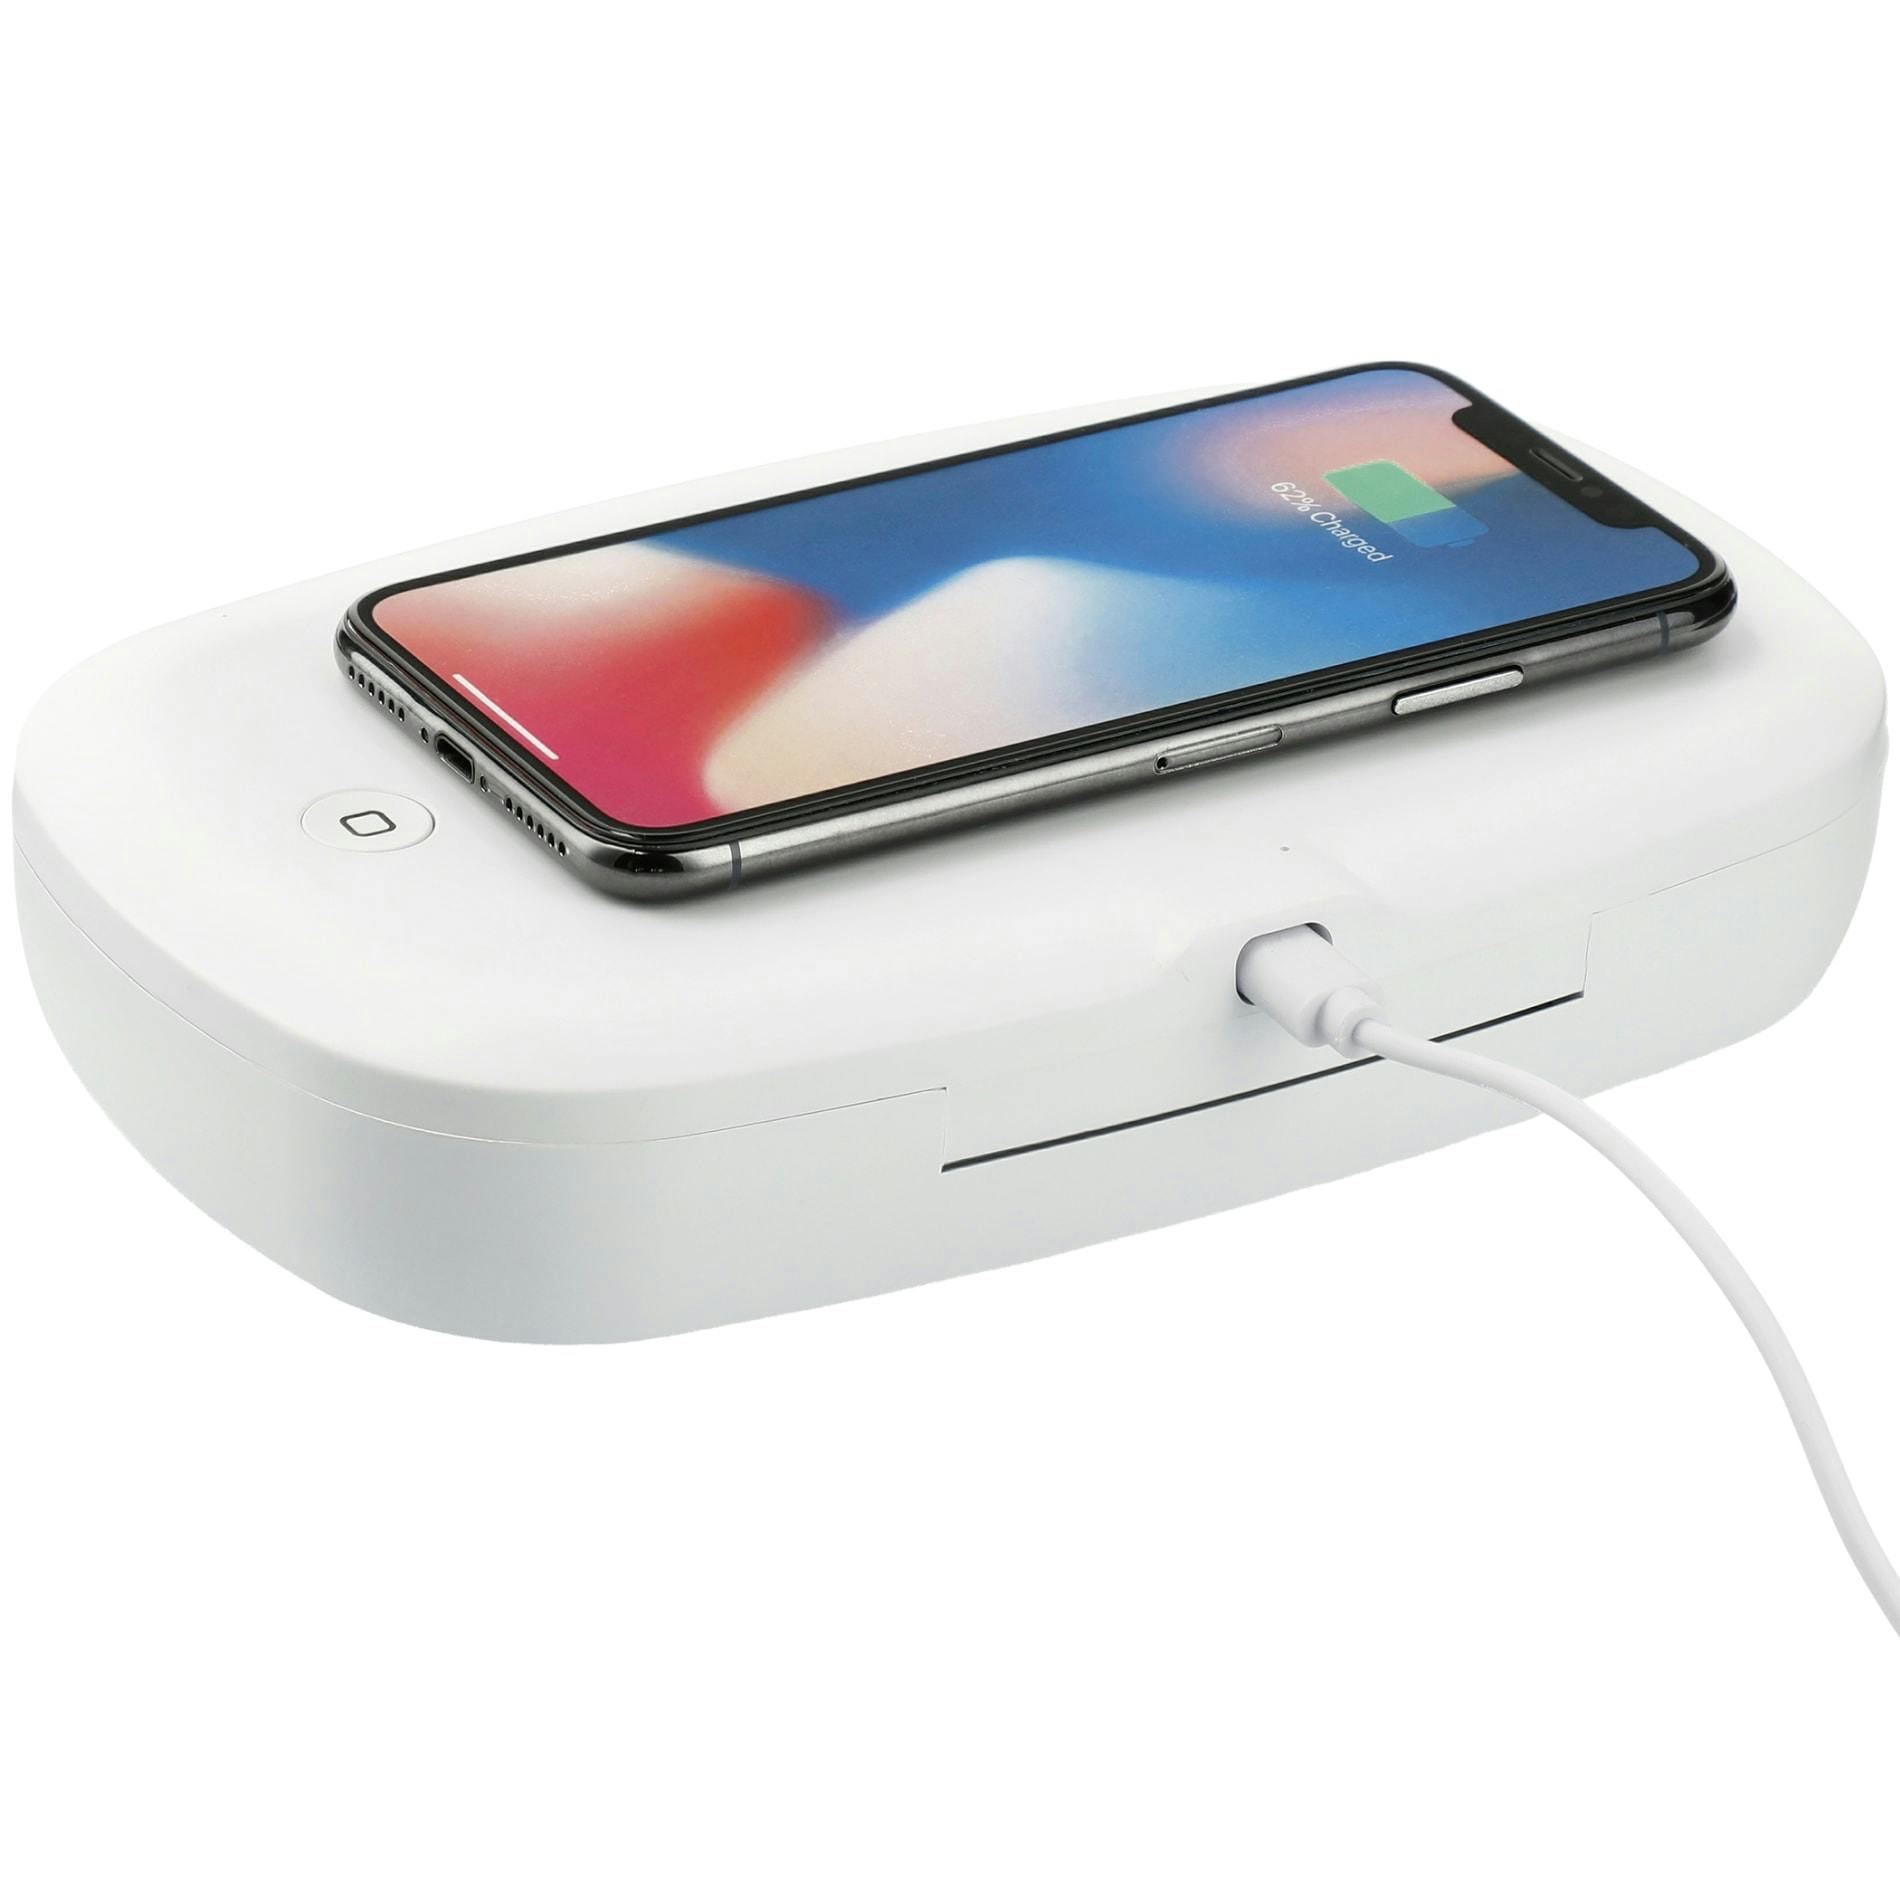 UV Phone Sanitizer with Wireless Charging Pad - additional Image 1